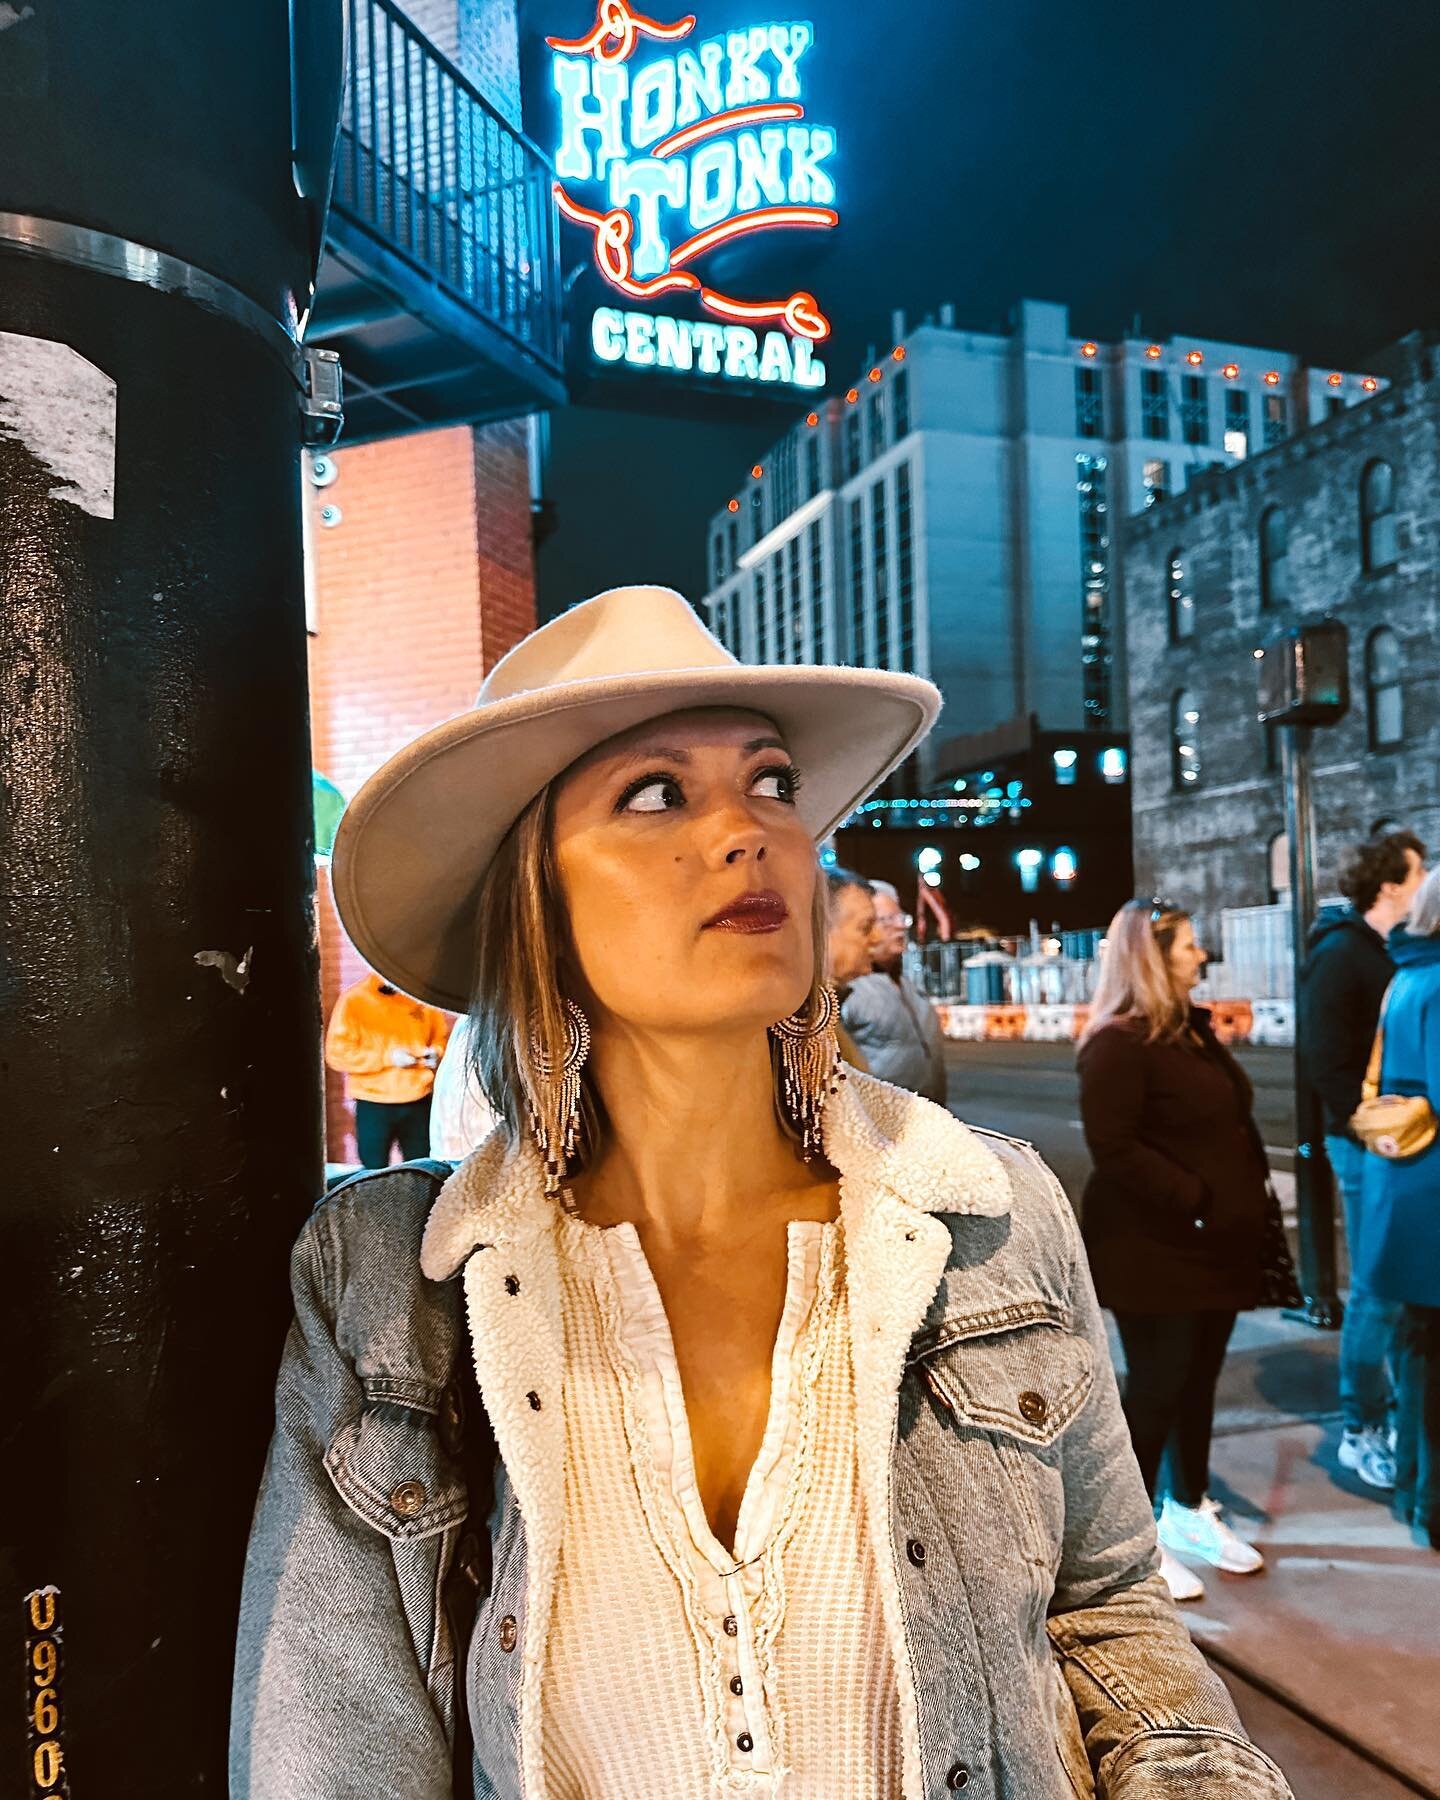 Honkeytonk queening for a night🤠 thanks to my girl @meganamarlow for capturing all of it🤍 See you soon, Nashville. #nashville #honkeytonk #alwaysdreaming